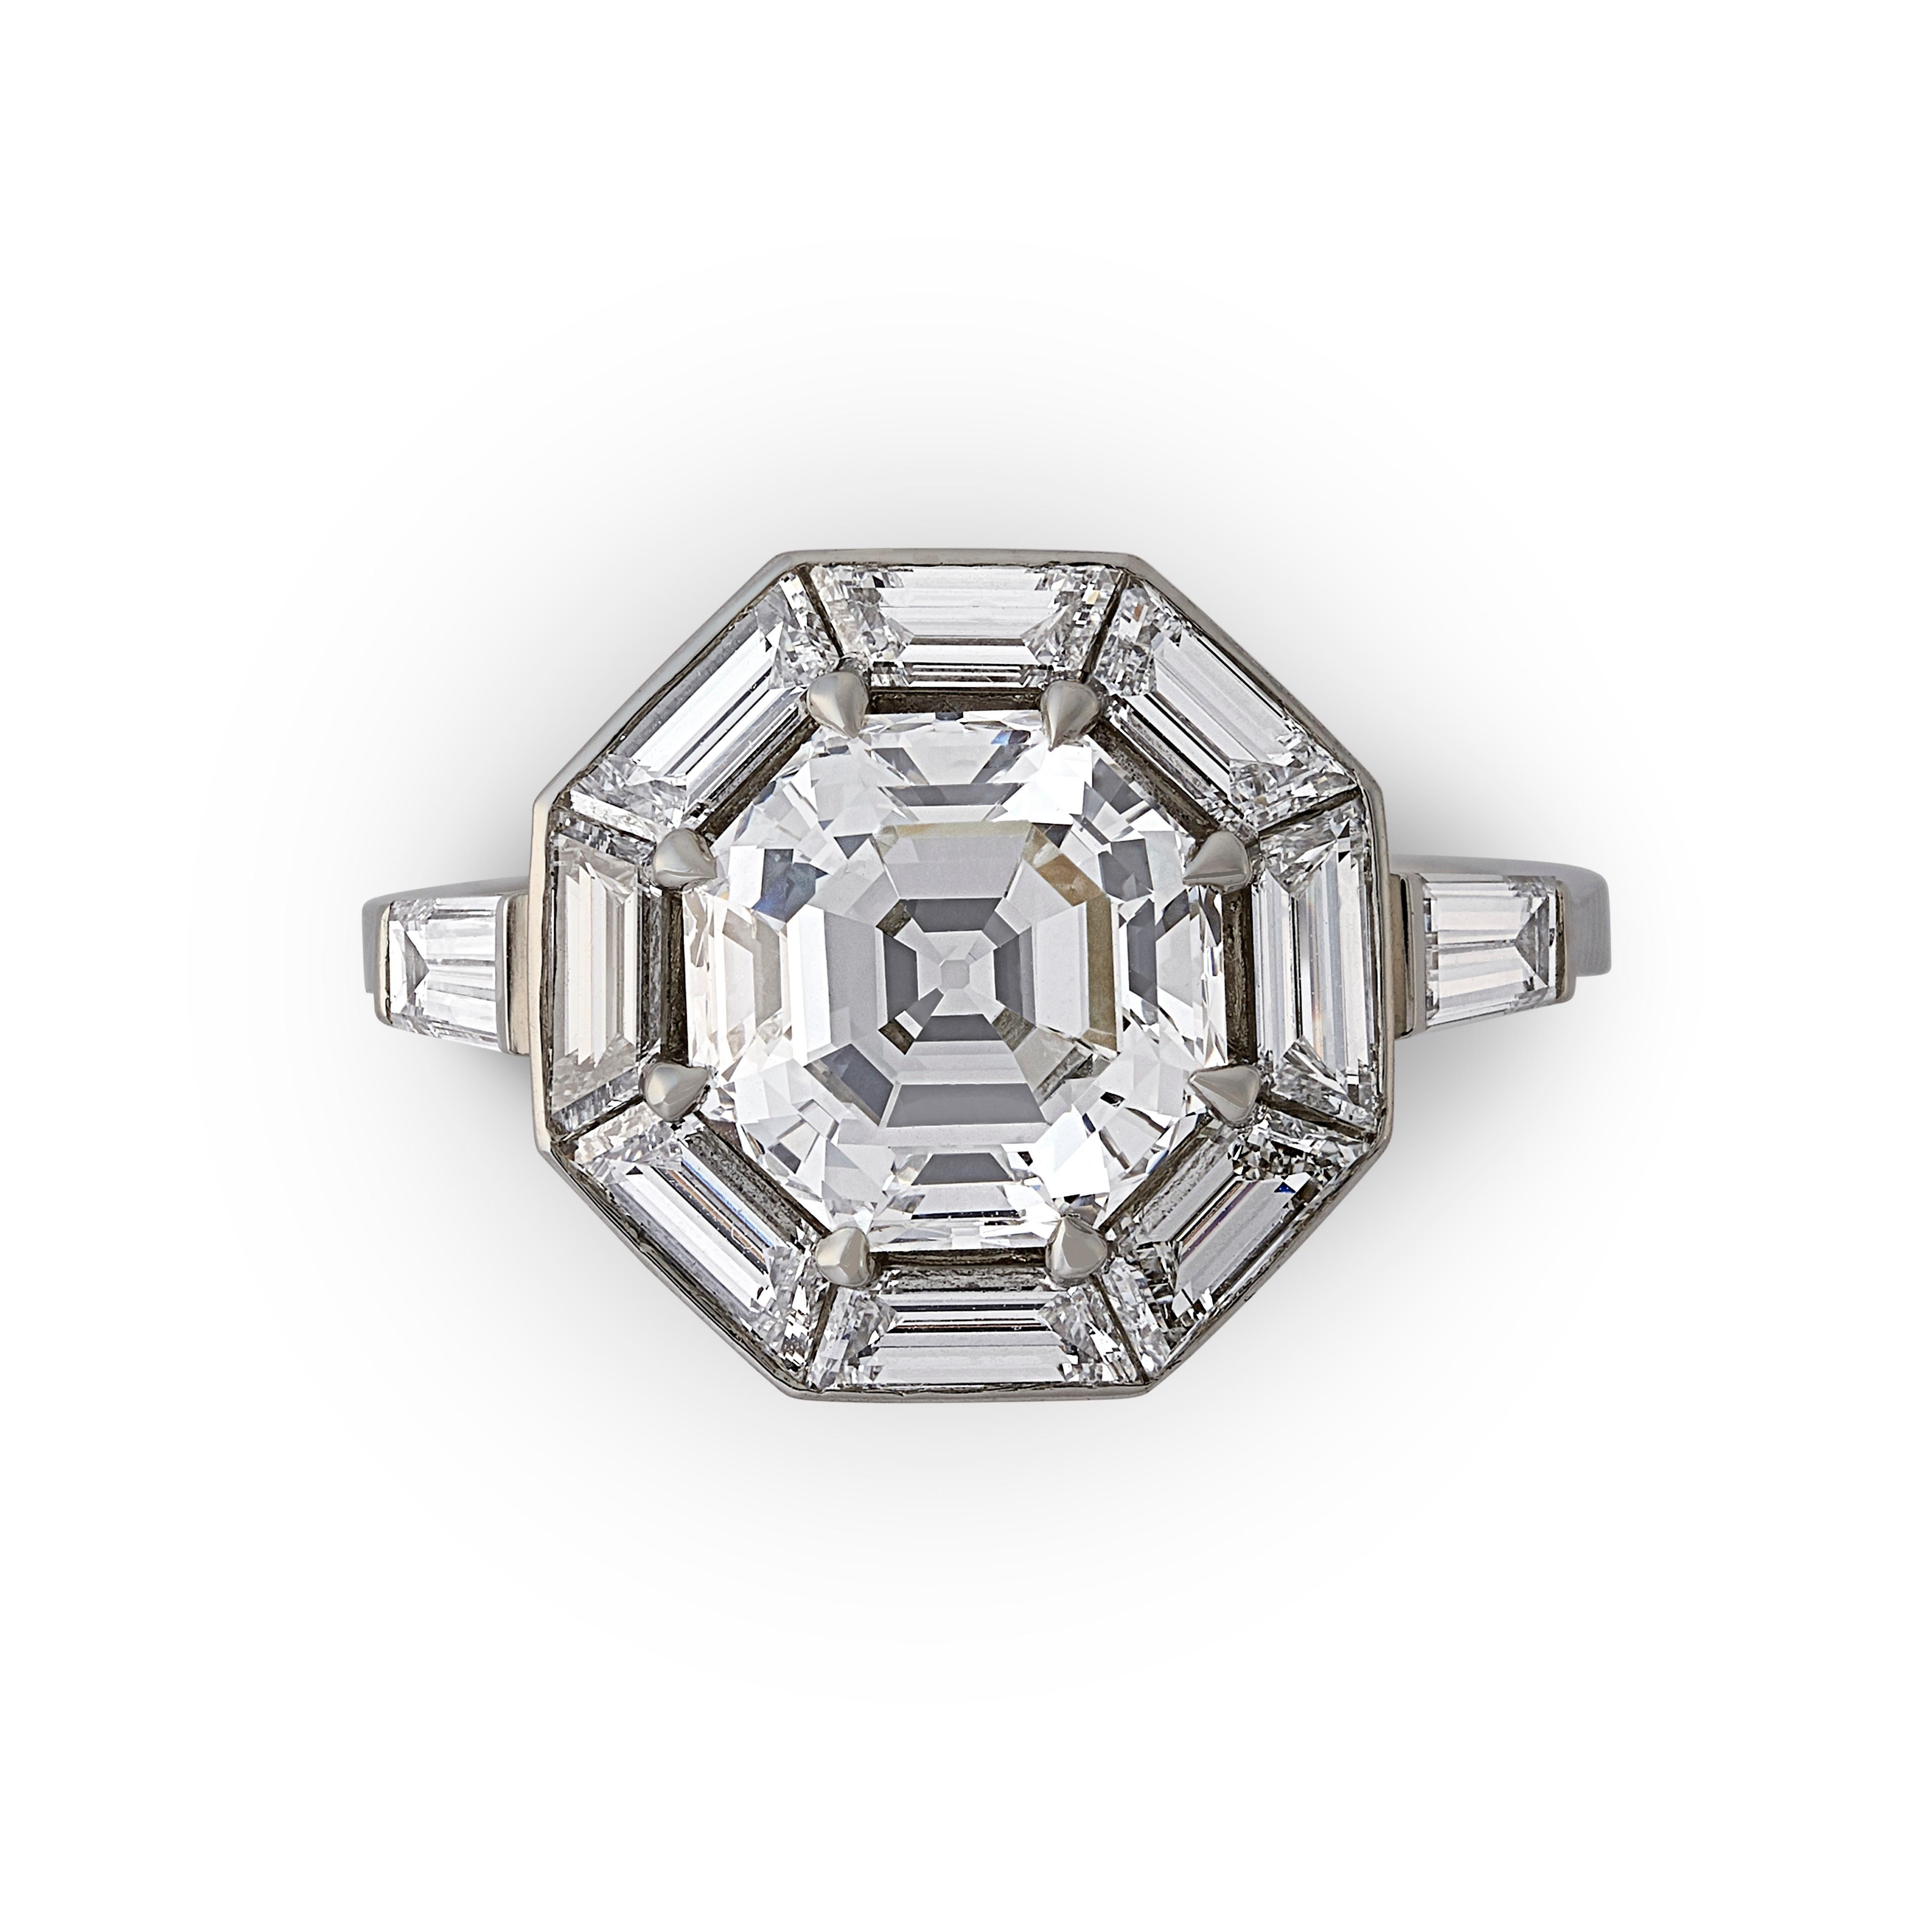 3.02ct Vintage octagonal diamond ring by Hancocks, centred on a beautiful step-cut octagonal diamond weighing 3.02cts and of F colour and VS1 clarity claw set within a calibre-cut halo of trapezoid diamonds in a channel setting between elegantly